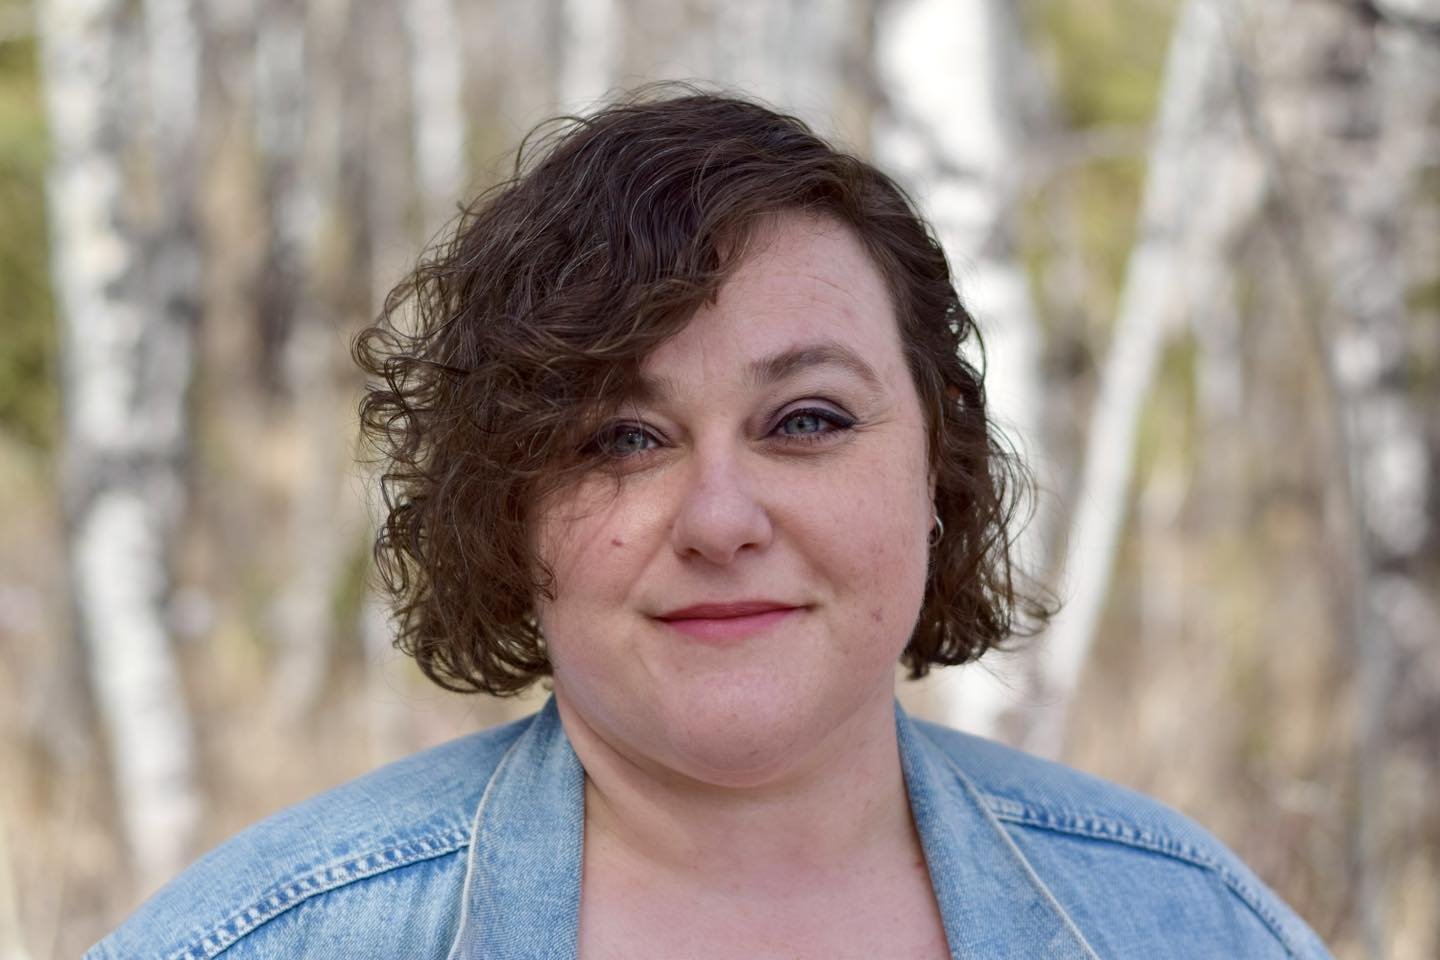 Please welcome Heather Samarron to the BHC Team! 📣🎉
.
My name&rsquo;s Heather Samarron (M.S.W., R.S.W.) and I am so excited to be joining the Being Human Club! I practice Contemporary Feminist Narrative Therapy (CFNT) and Sex Therapy through a CNFT